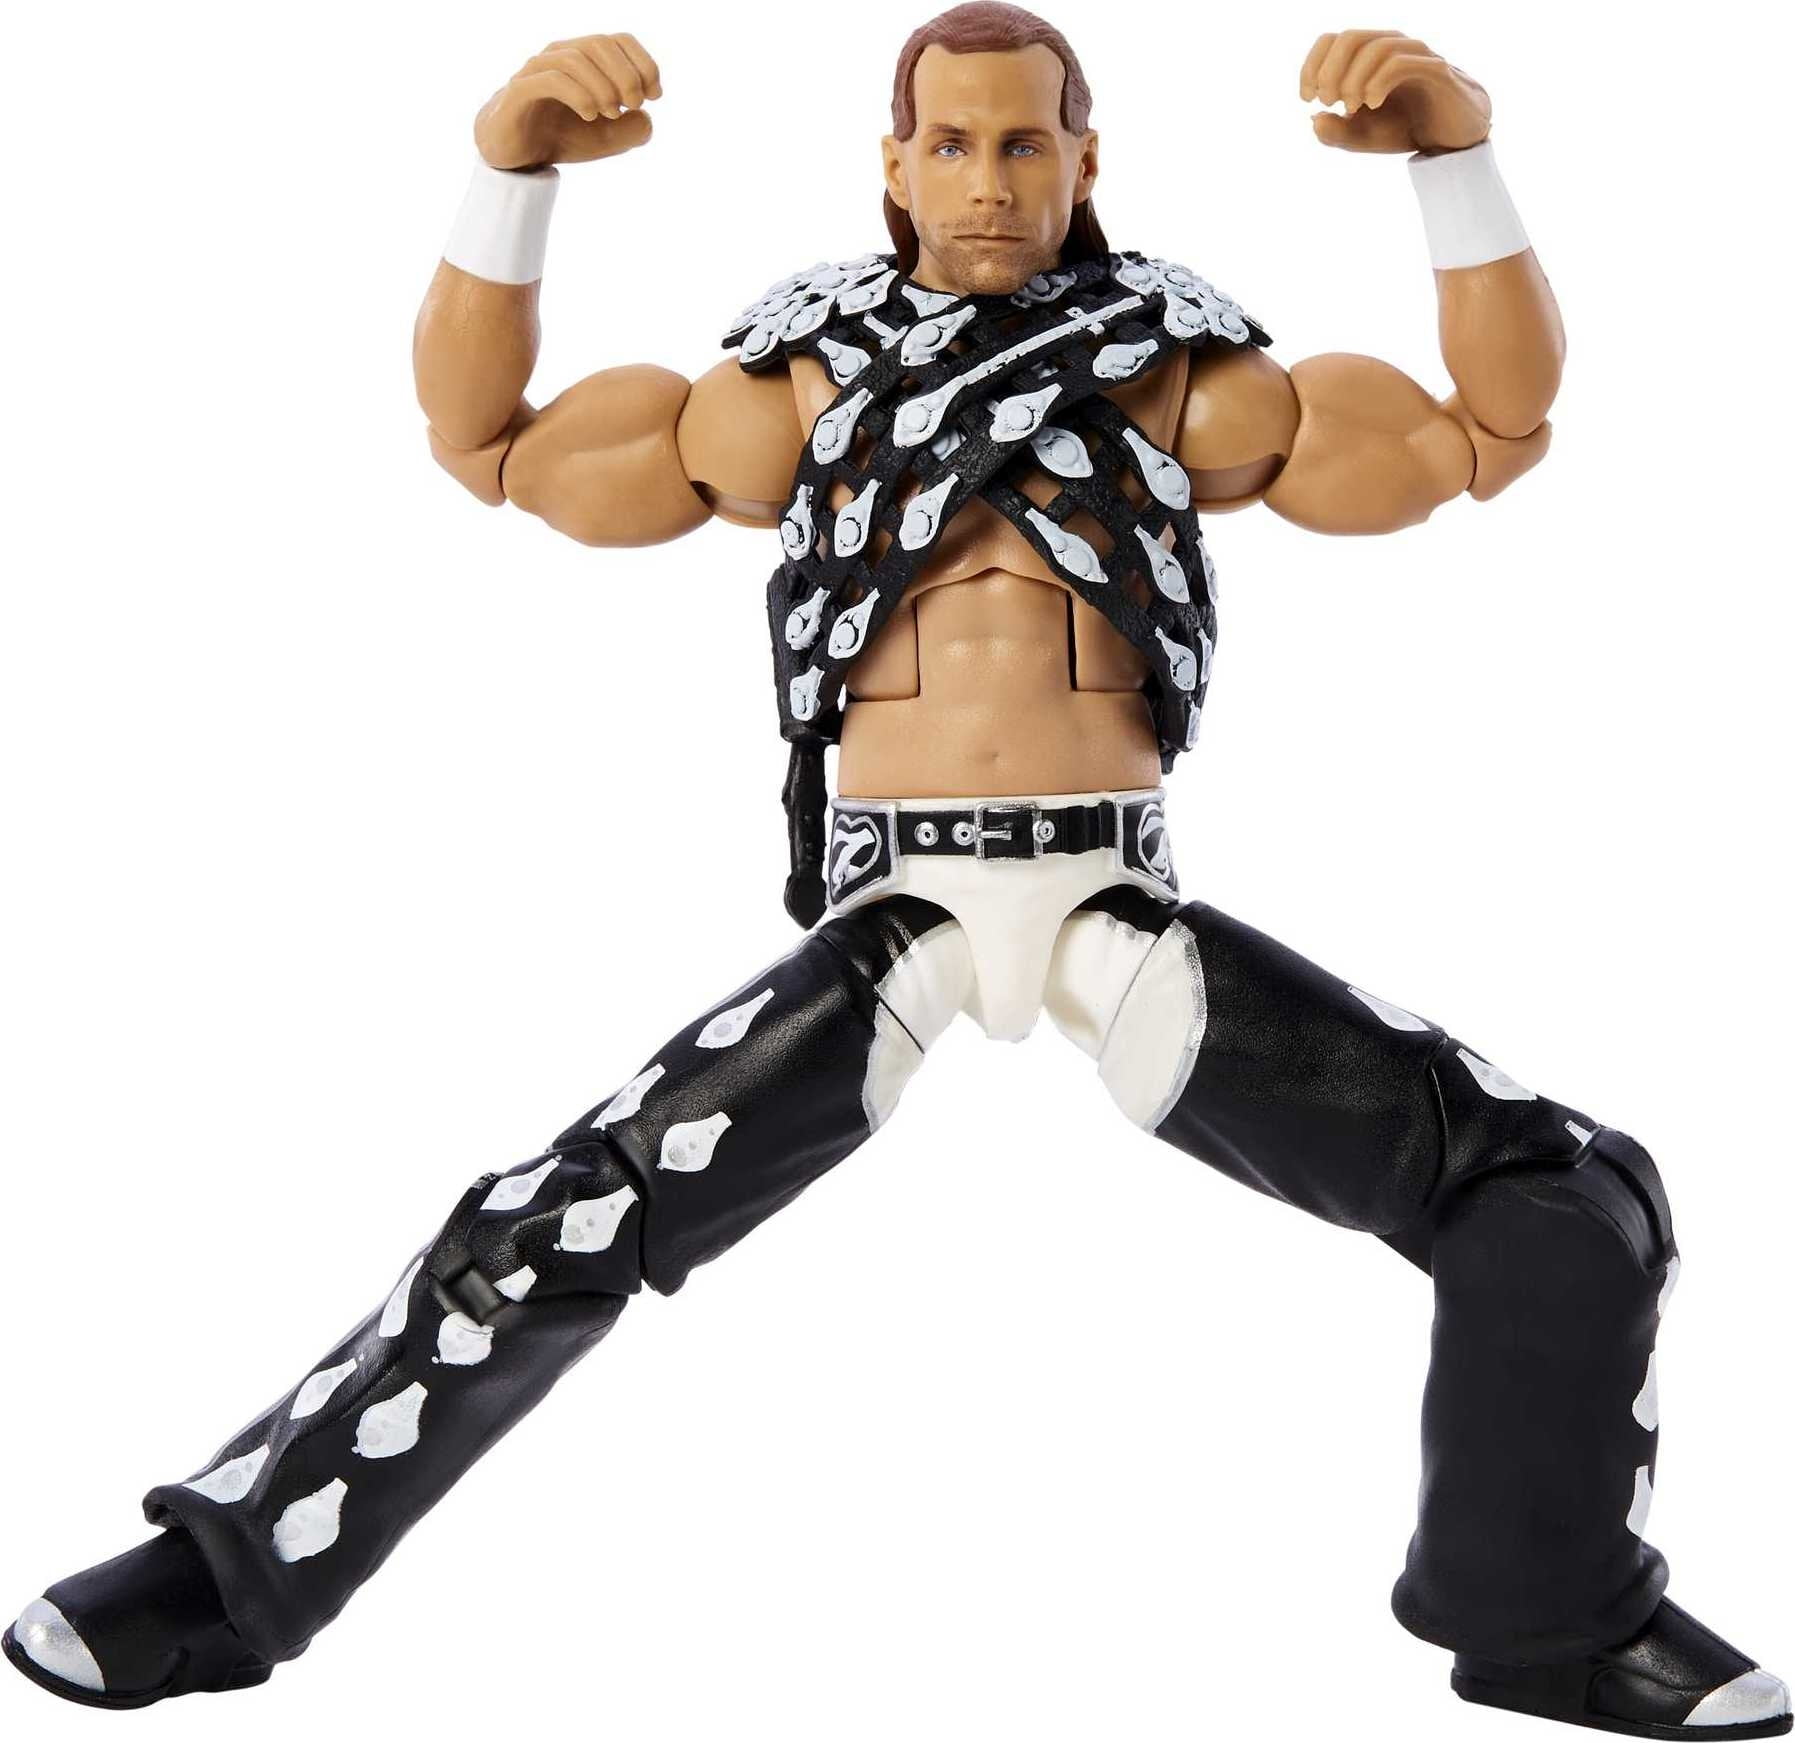 Wwe Shawn Michaels Action Figures